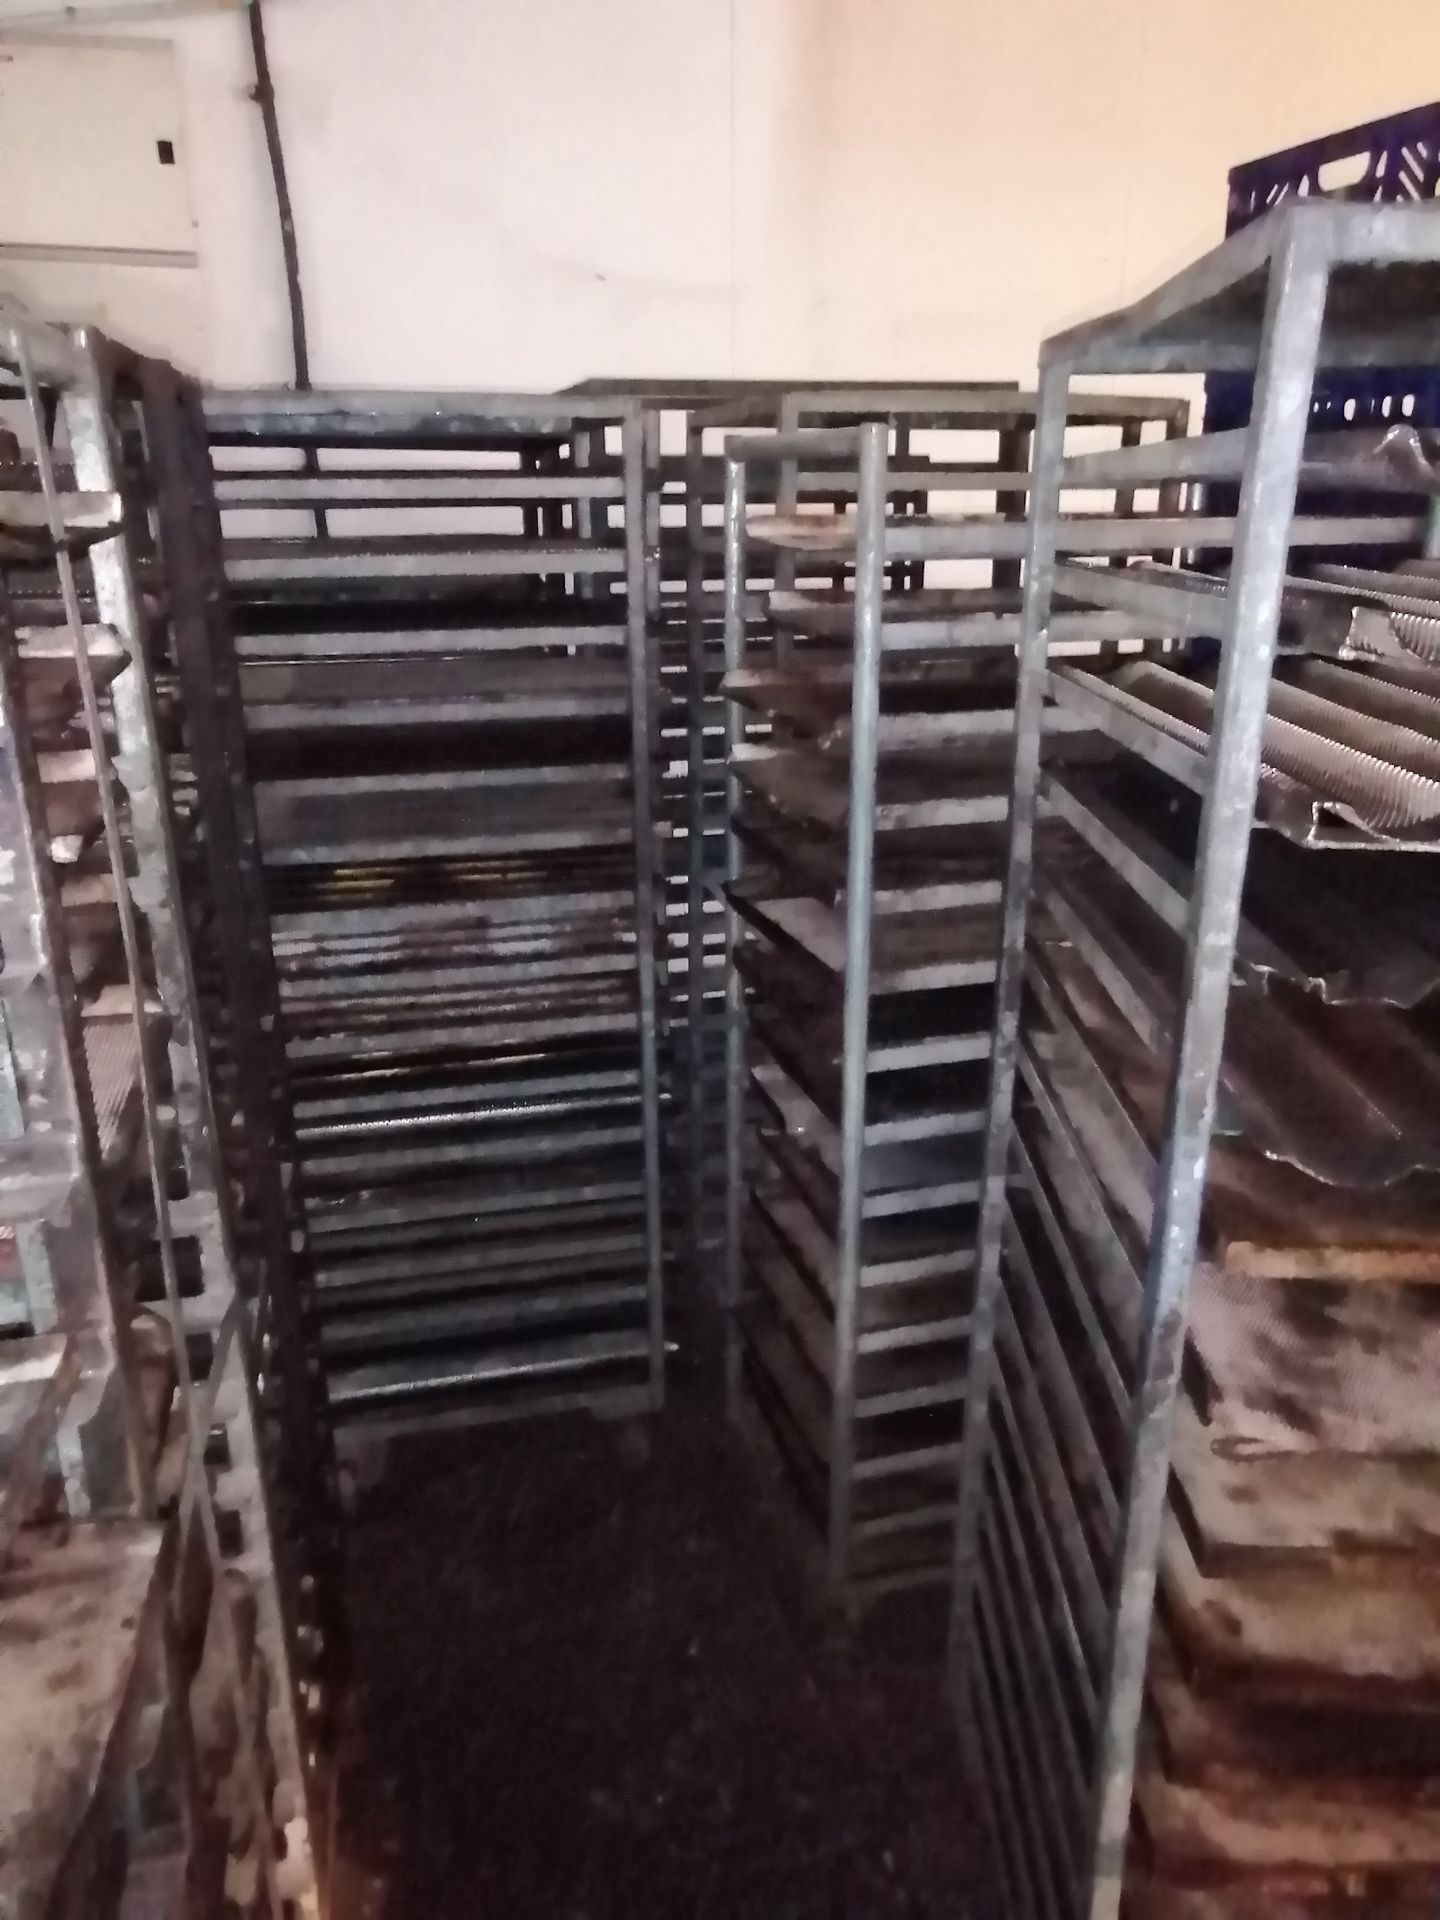 10 x Baking Tray Racking with Trays - Image 5 of 5